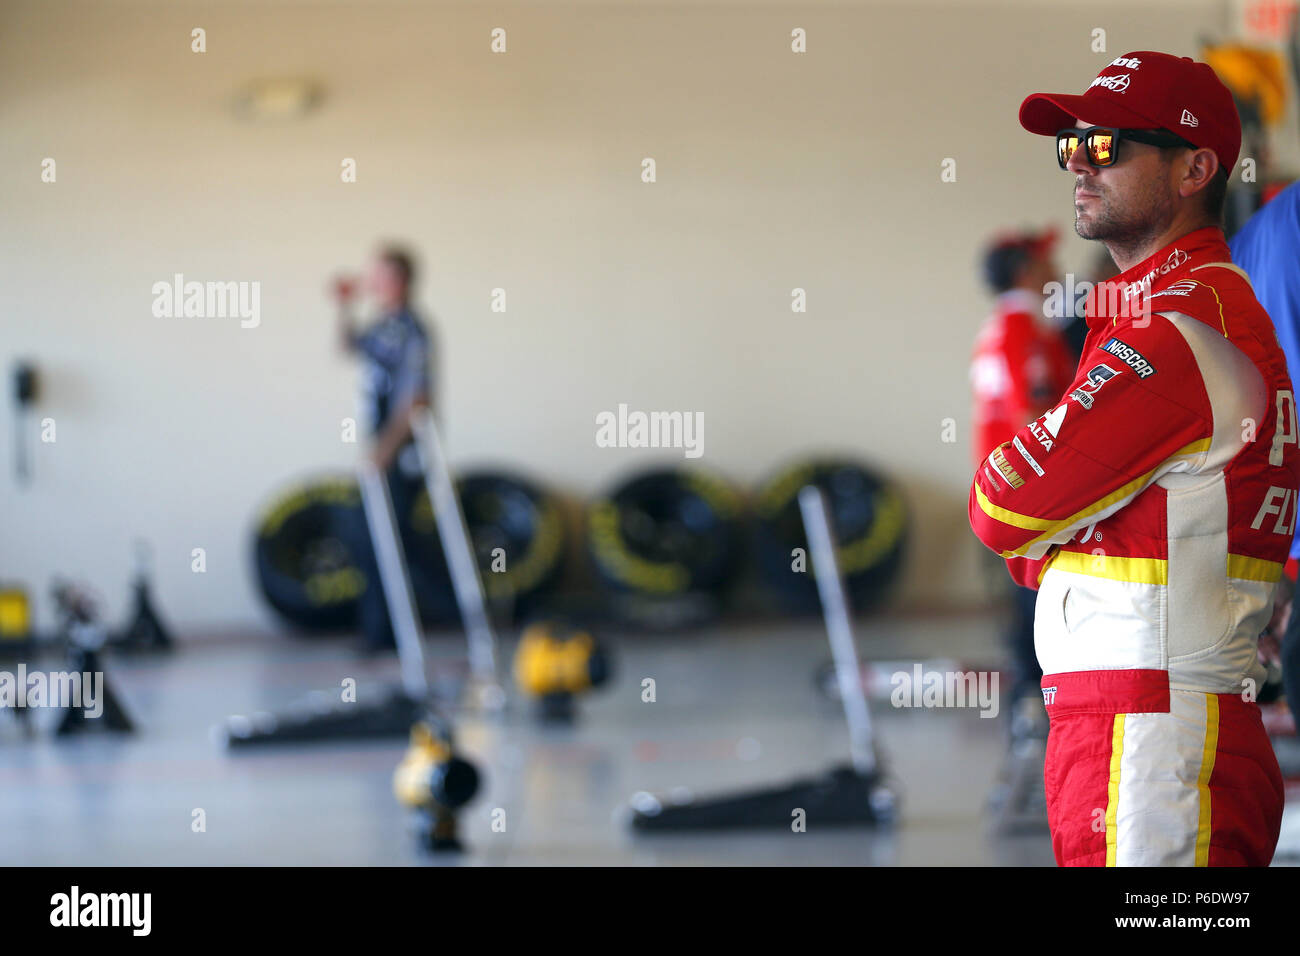 Joliet, Illinois, USA. 29th June, 2018. Michael Annett (5) gets ready to practice for the Overton's 300 at Chicagoland Speedway in Joliet, Illinois. Credit: Stephen A. Arce/ASP/ZUMA Wire/Alamy Live News Stock Photo